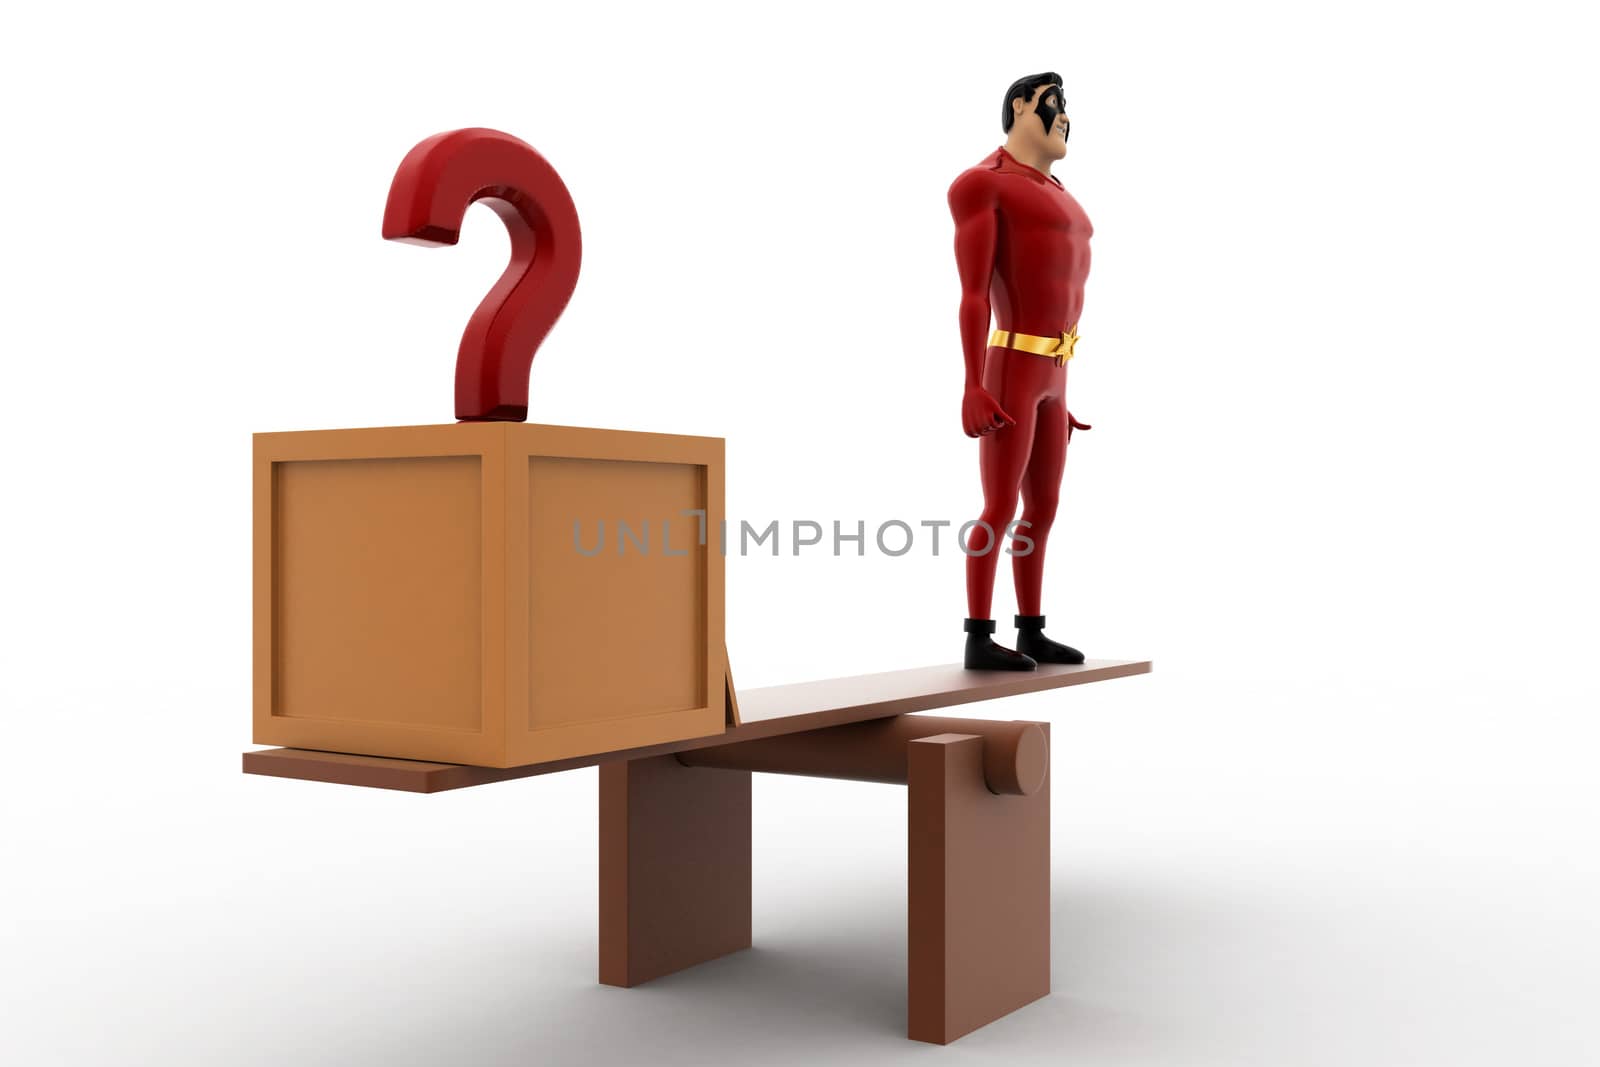 3d superhero with question mark and standing on seesaw for balan by touchmenithin@gmail.com